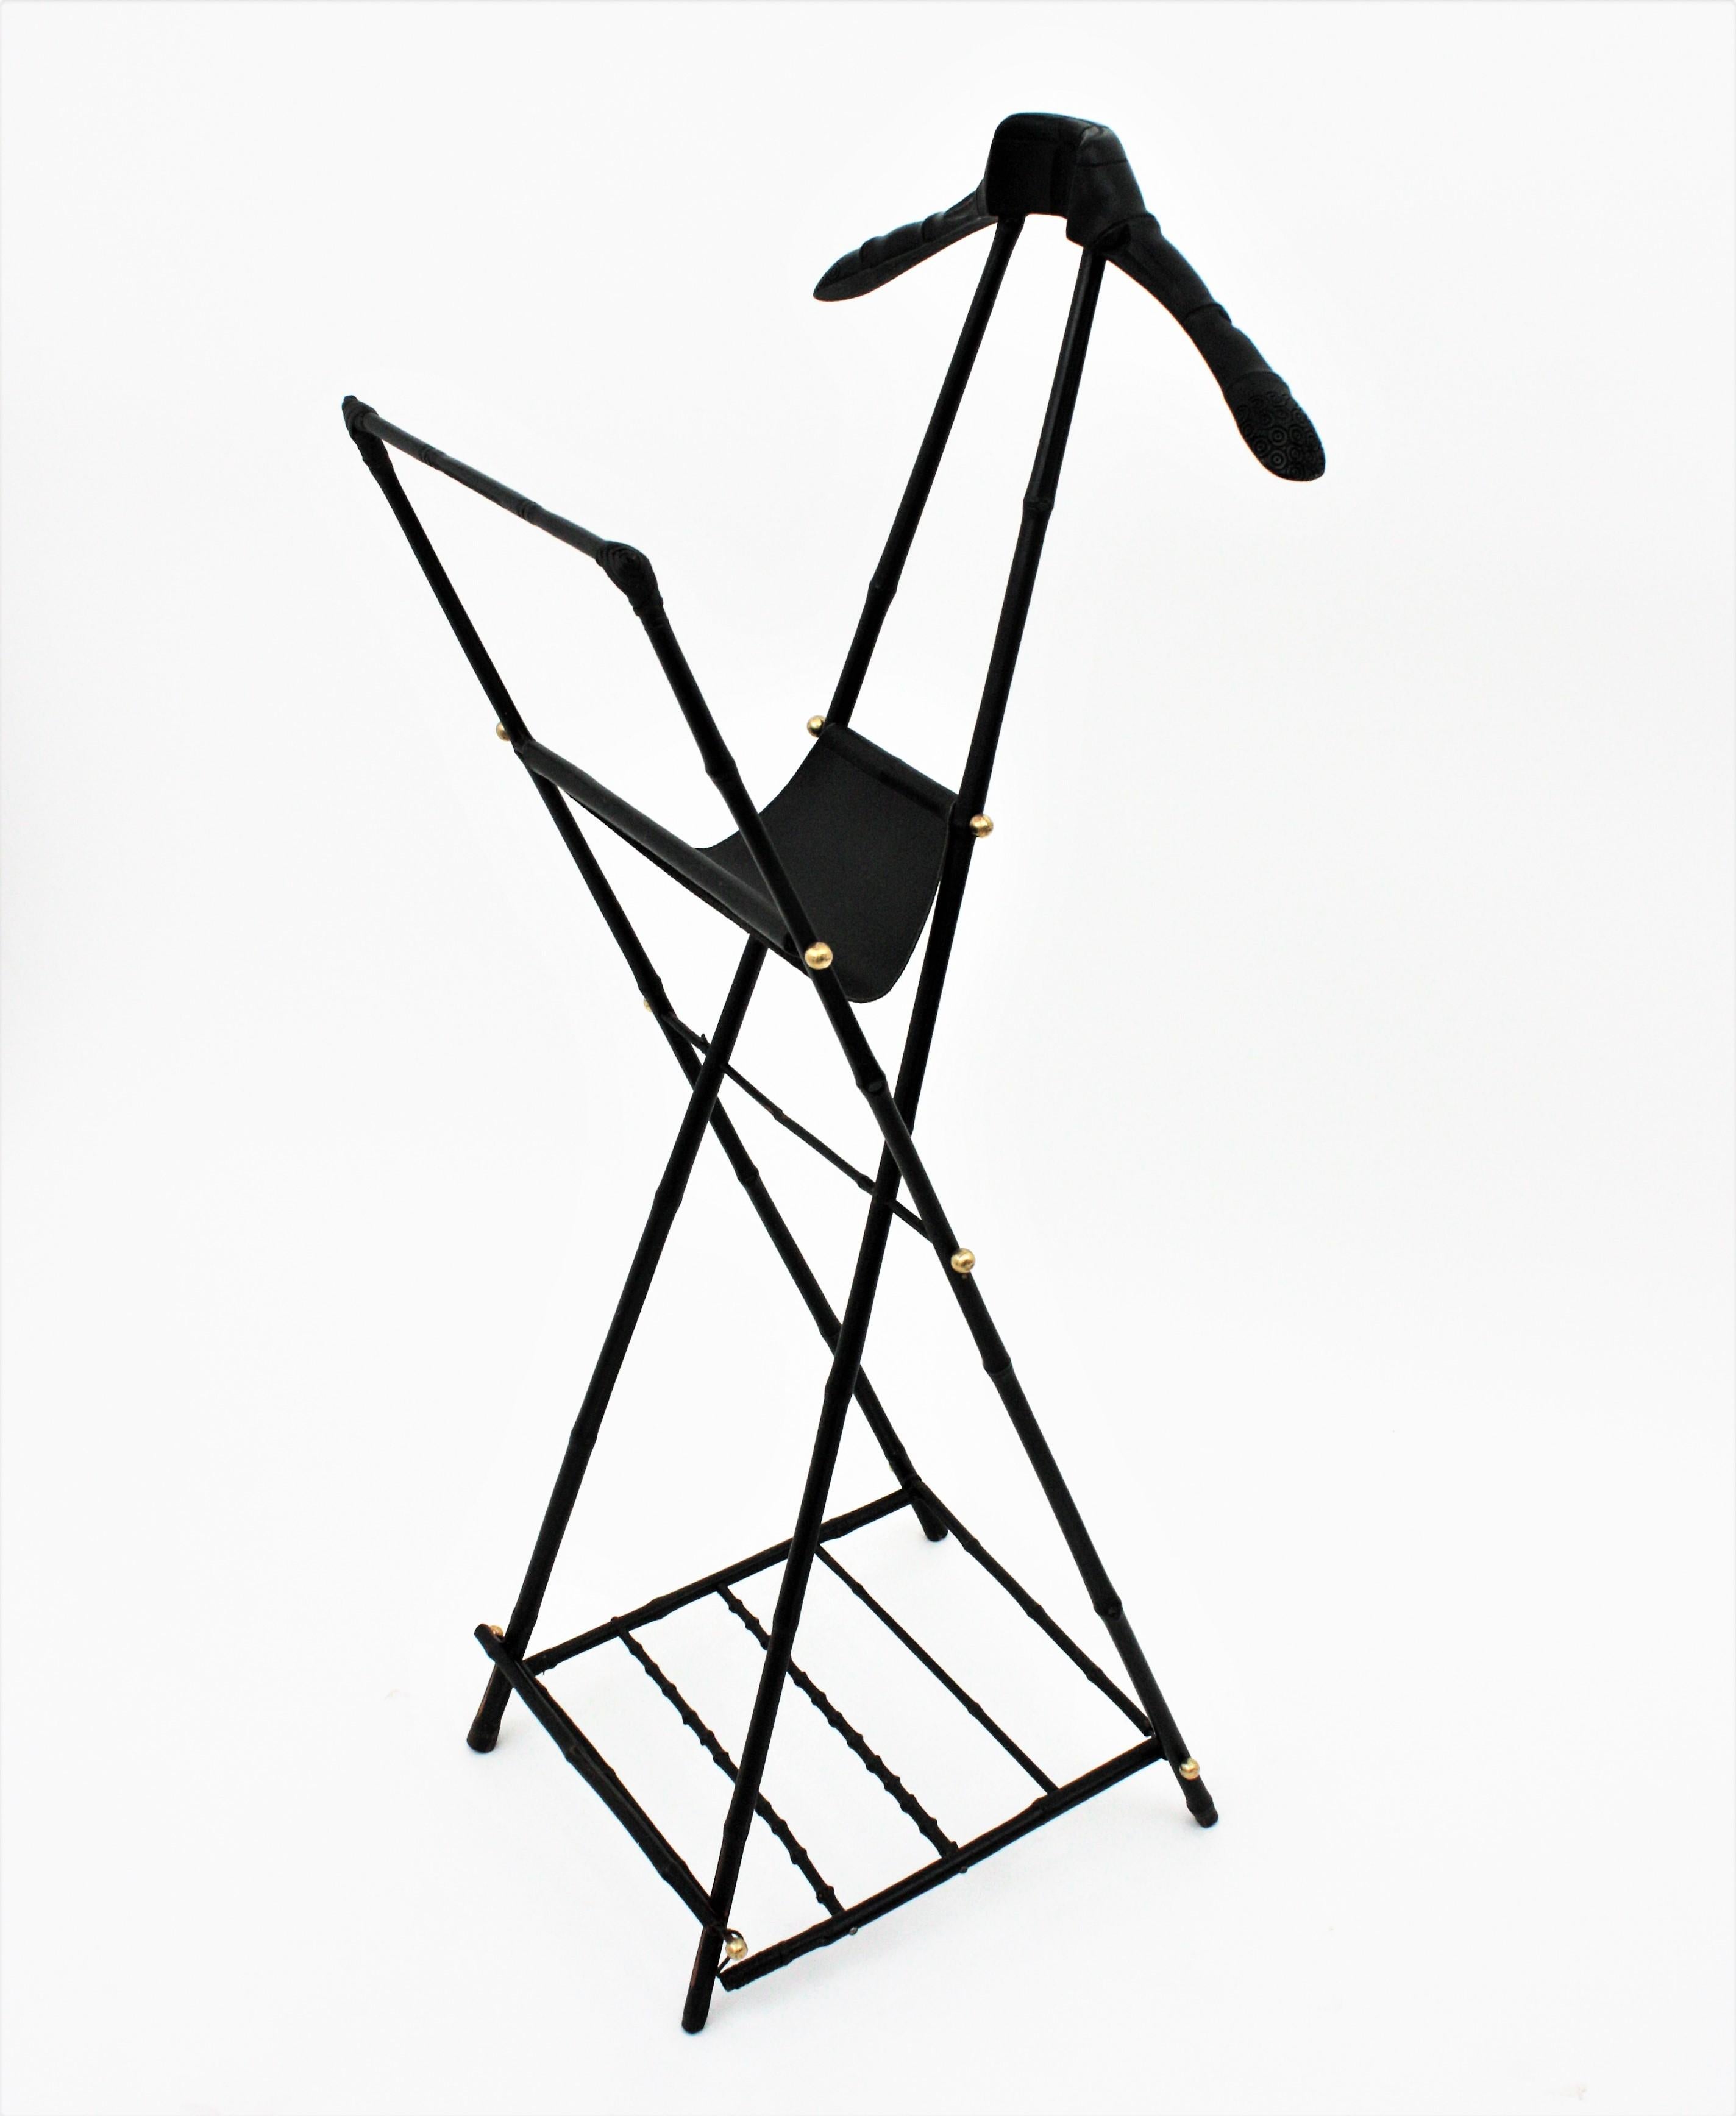 Jacques Adnet Foldable Valet or Coat Stand in Ebonized Bamboo & Black Leather, France, 1950s.
Gorgeous ebonized bamboo, wood and black leather folding valet with brass accents. Attributed to Jacques Adnet, 
This outstanding valet or coat stand is